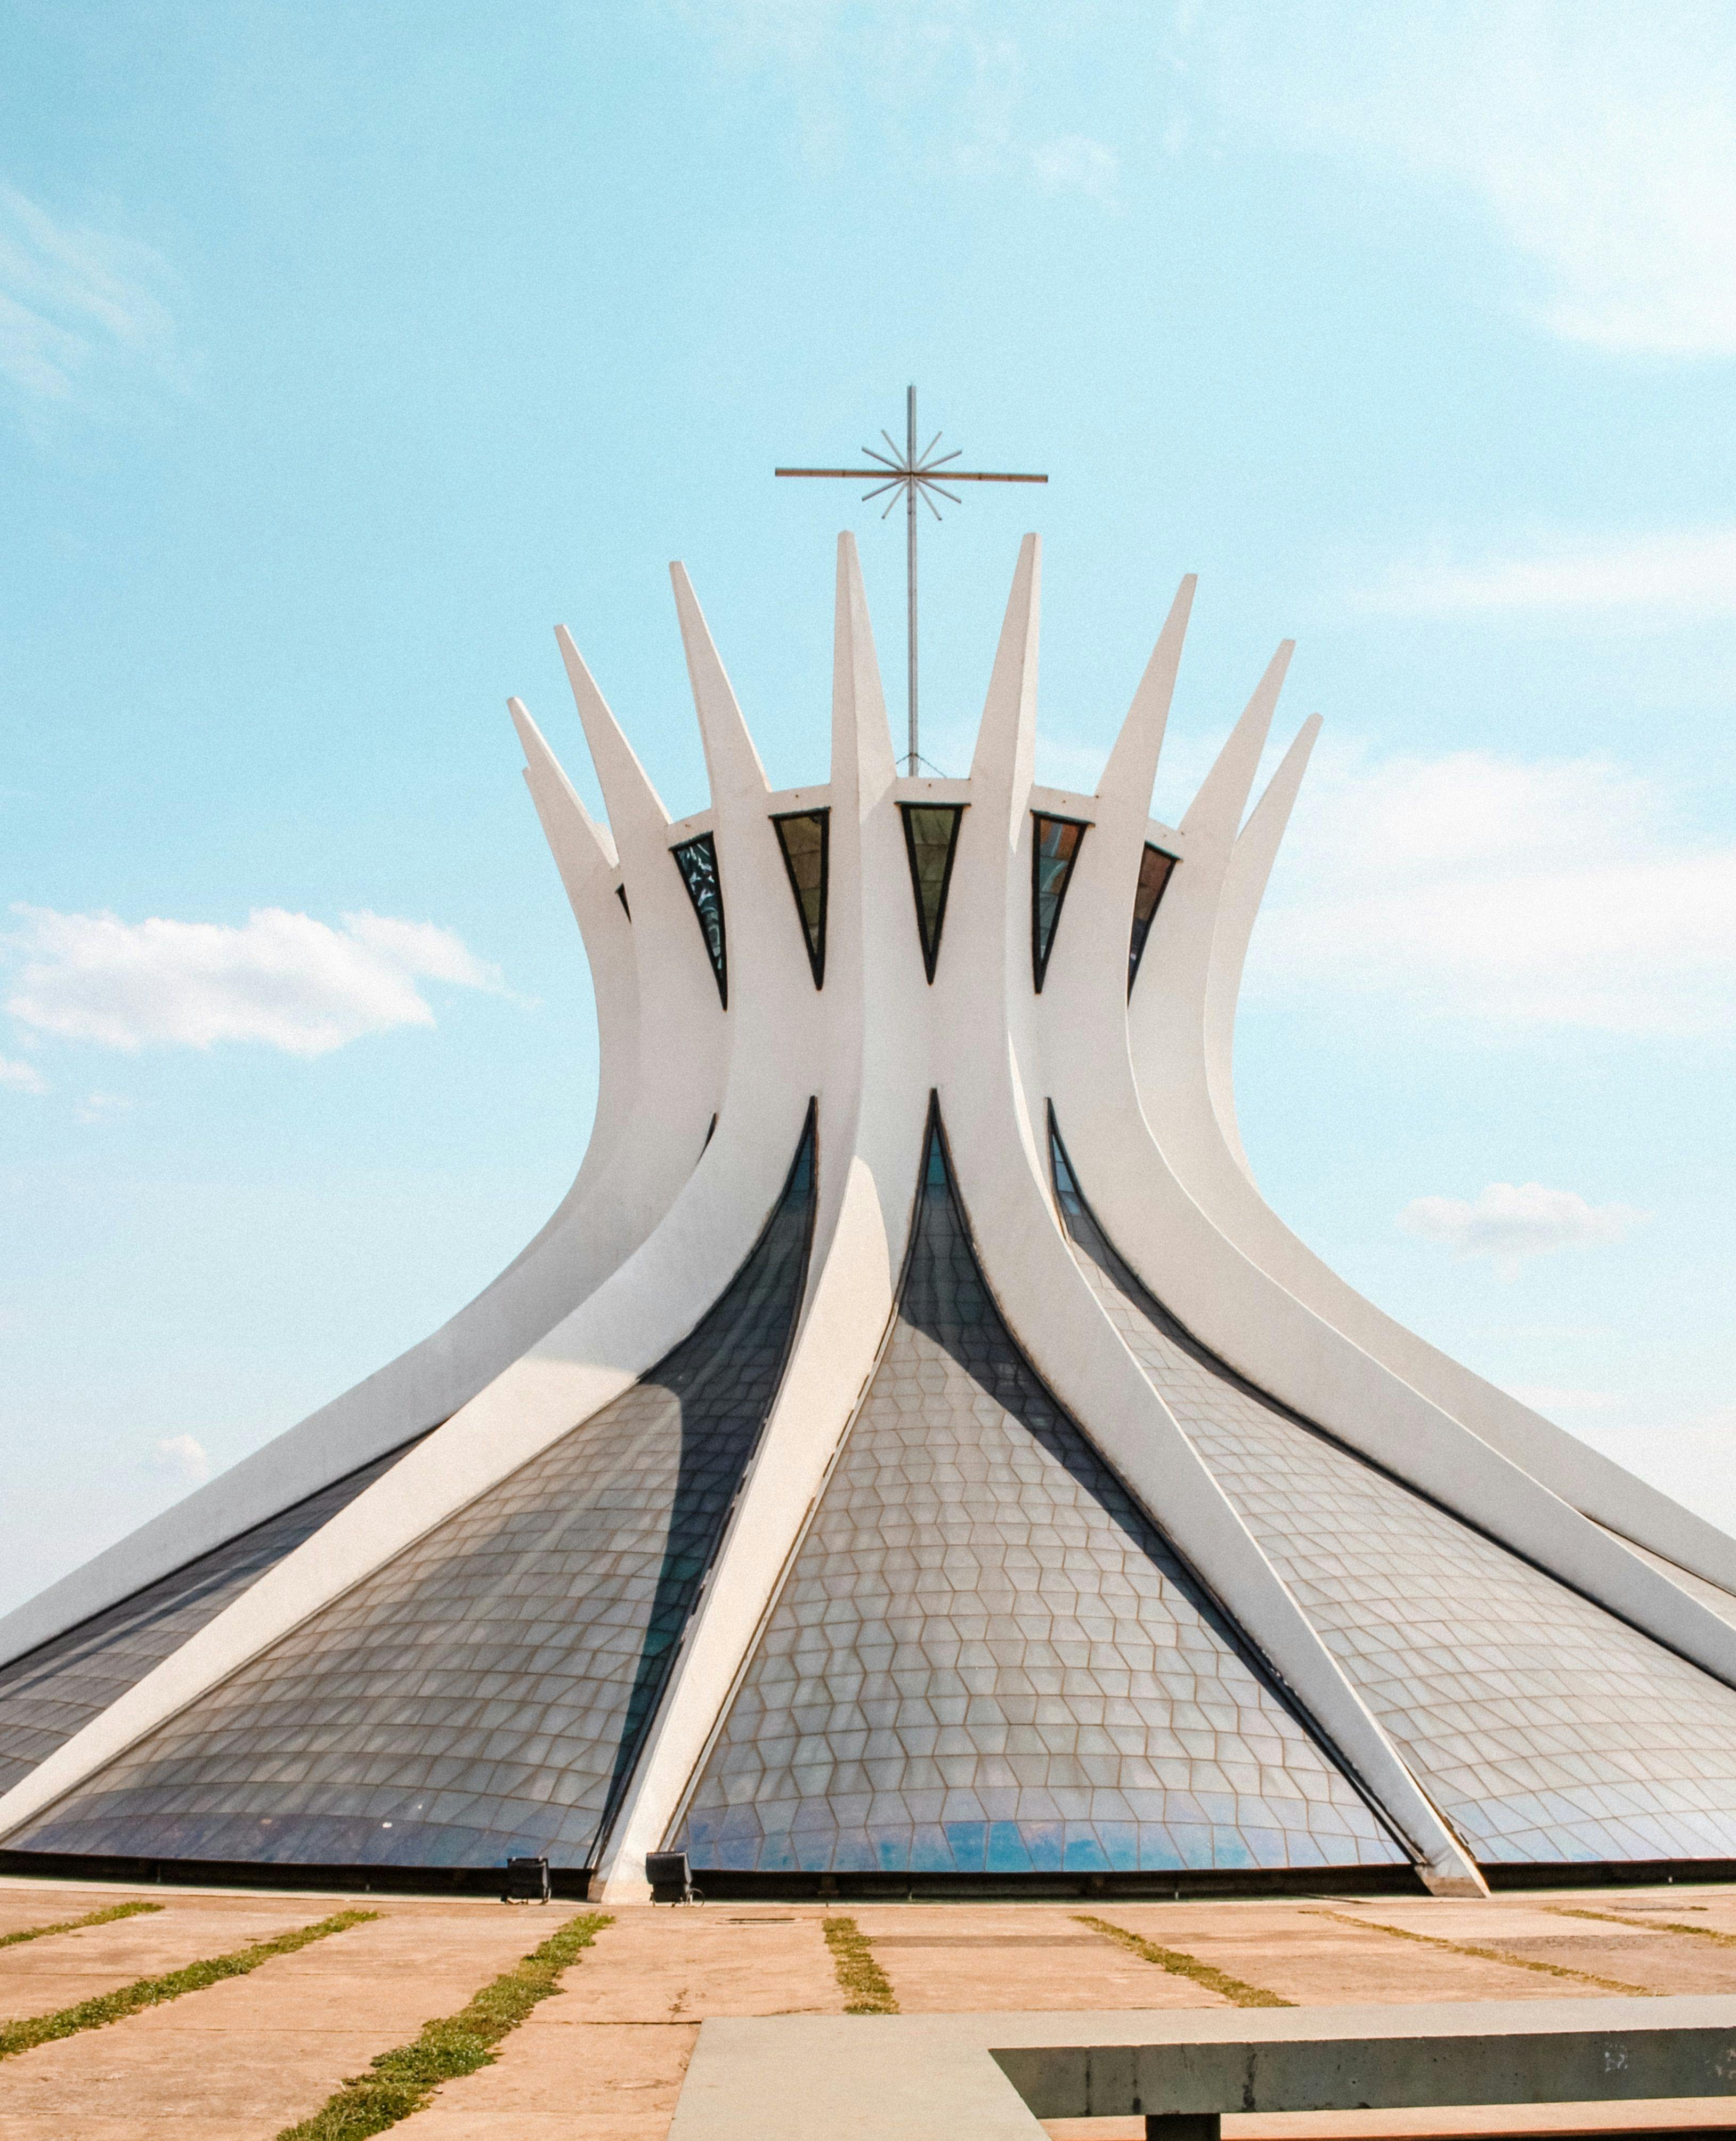 View of Cathedral of Brasília, Brazil.